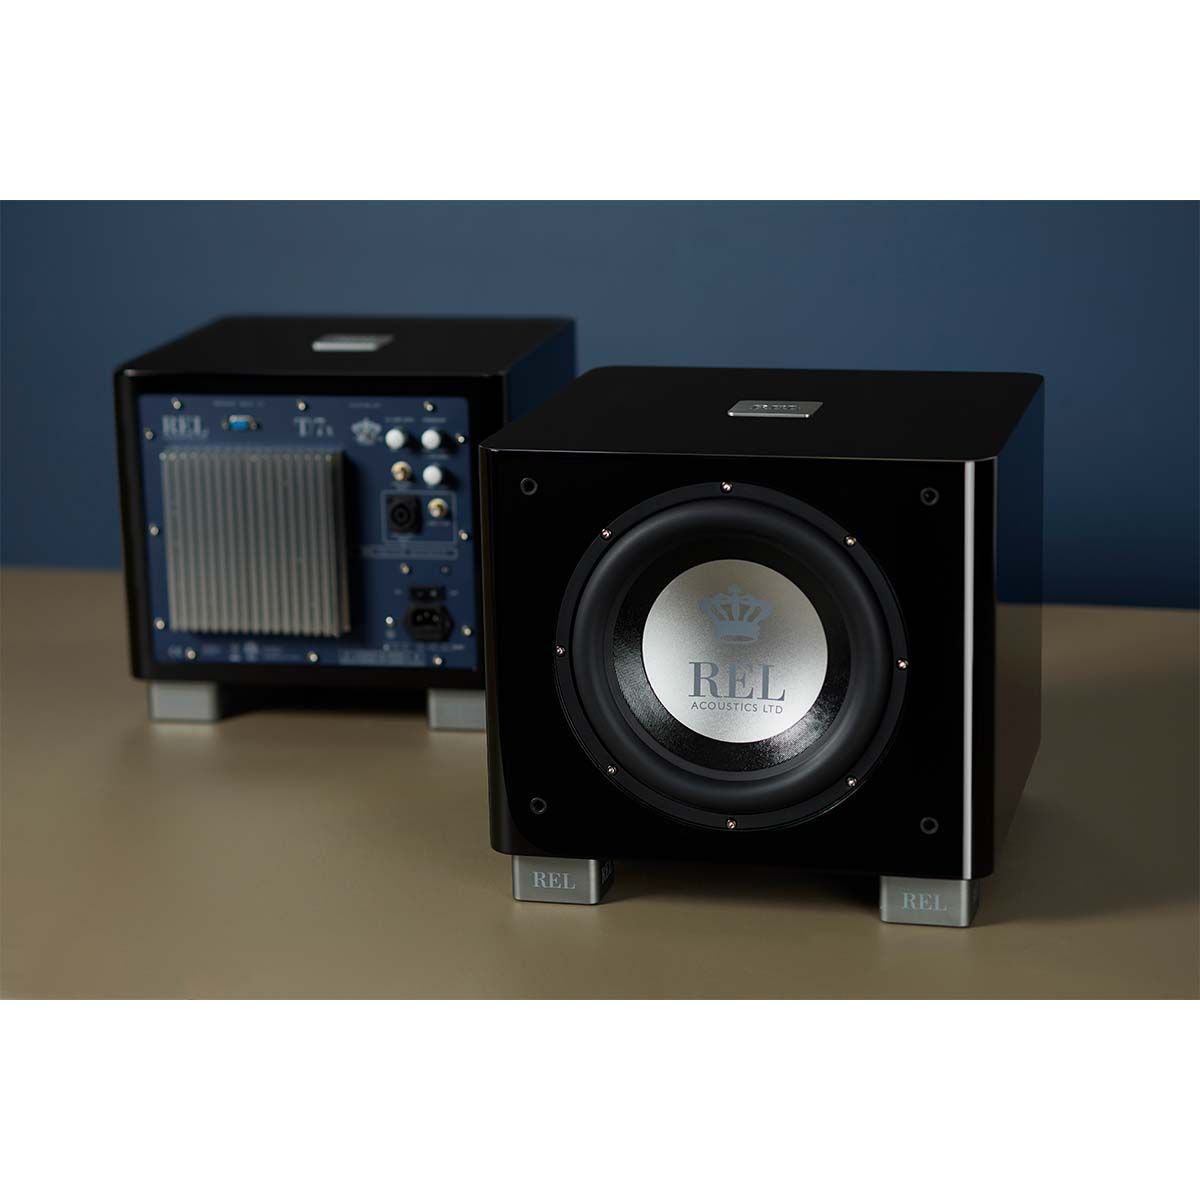 REL T/7x Subwoofer, black, set of two with front and back view